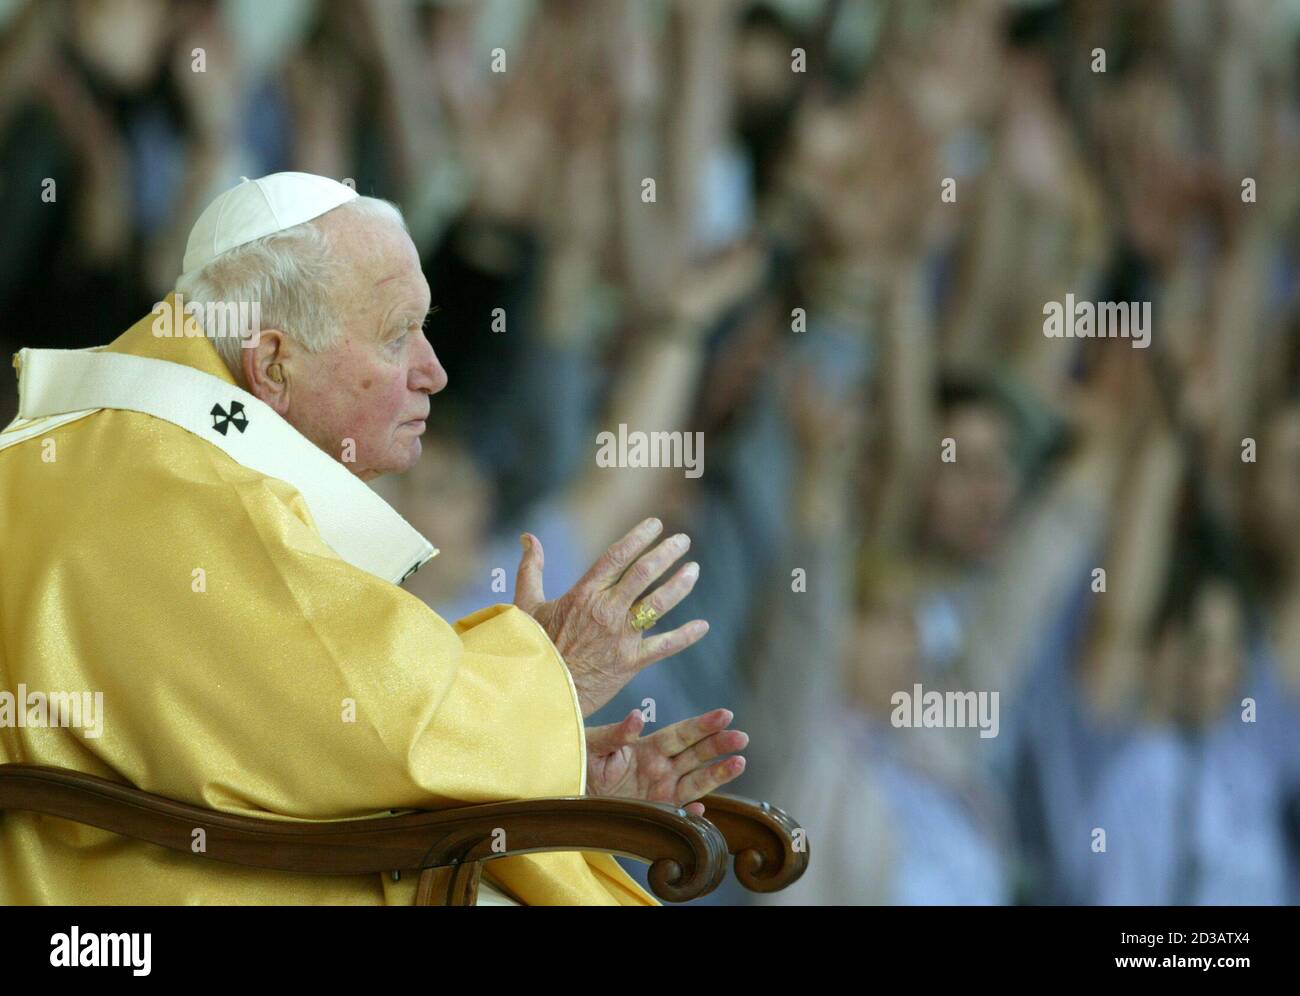 Pope John Paul II celebrates mass in the Allmend park in Berne June 6,  2004. [The 84-year-old pontiff read mass in a relatively clear voice to  more than 70,000 faithful during his